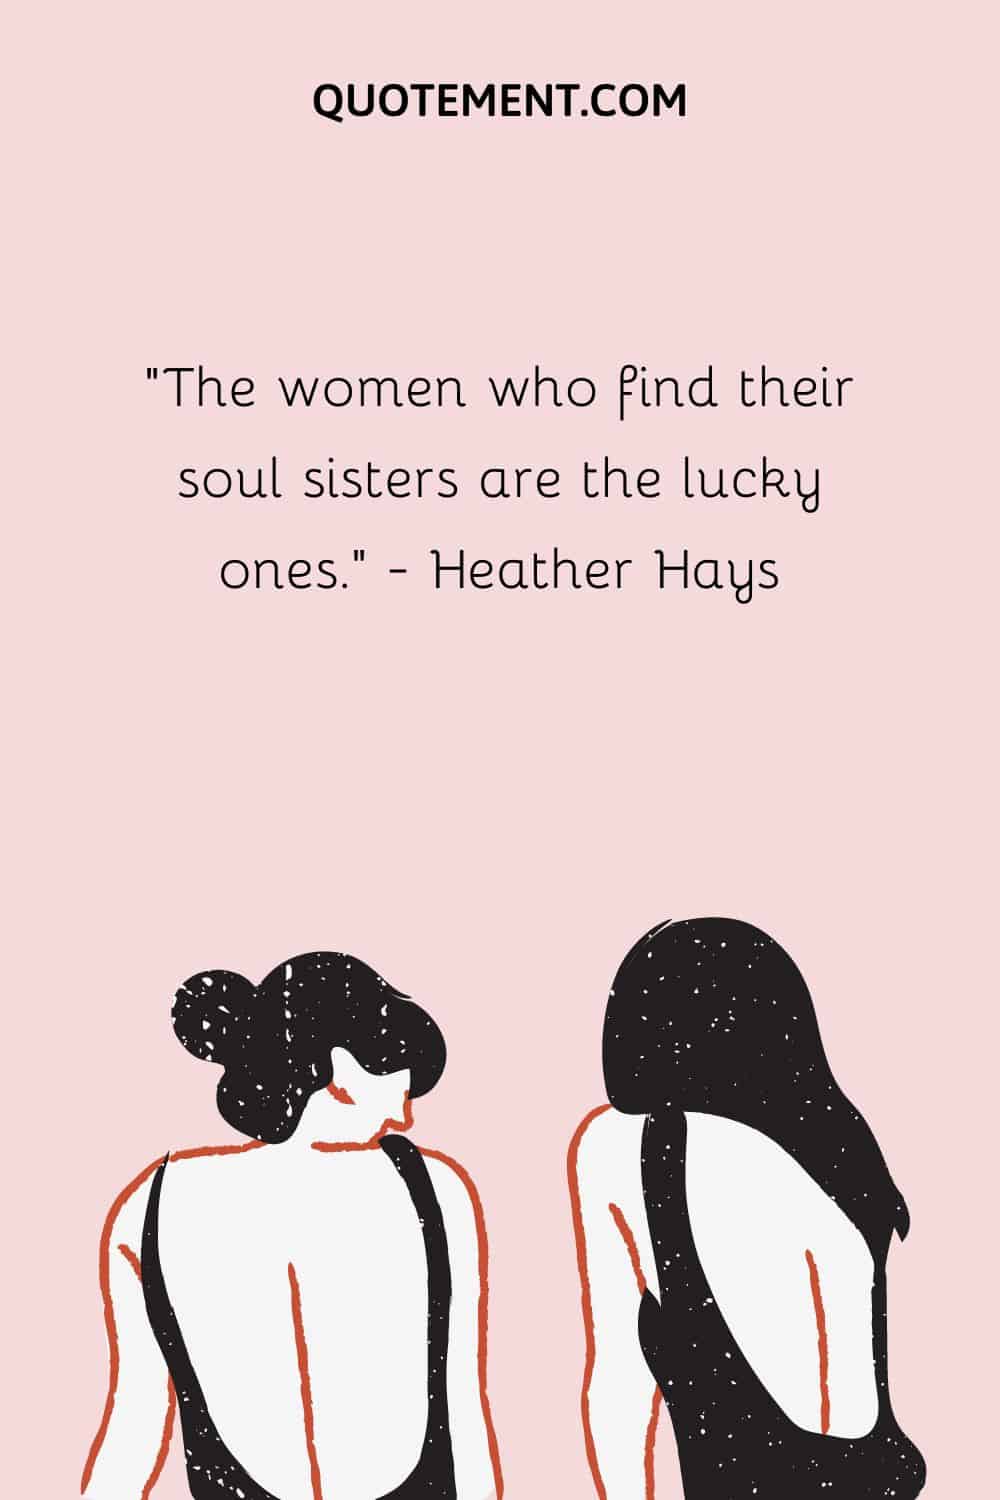 The women who find their soul sisters are the lucky ones